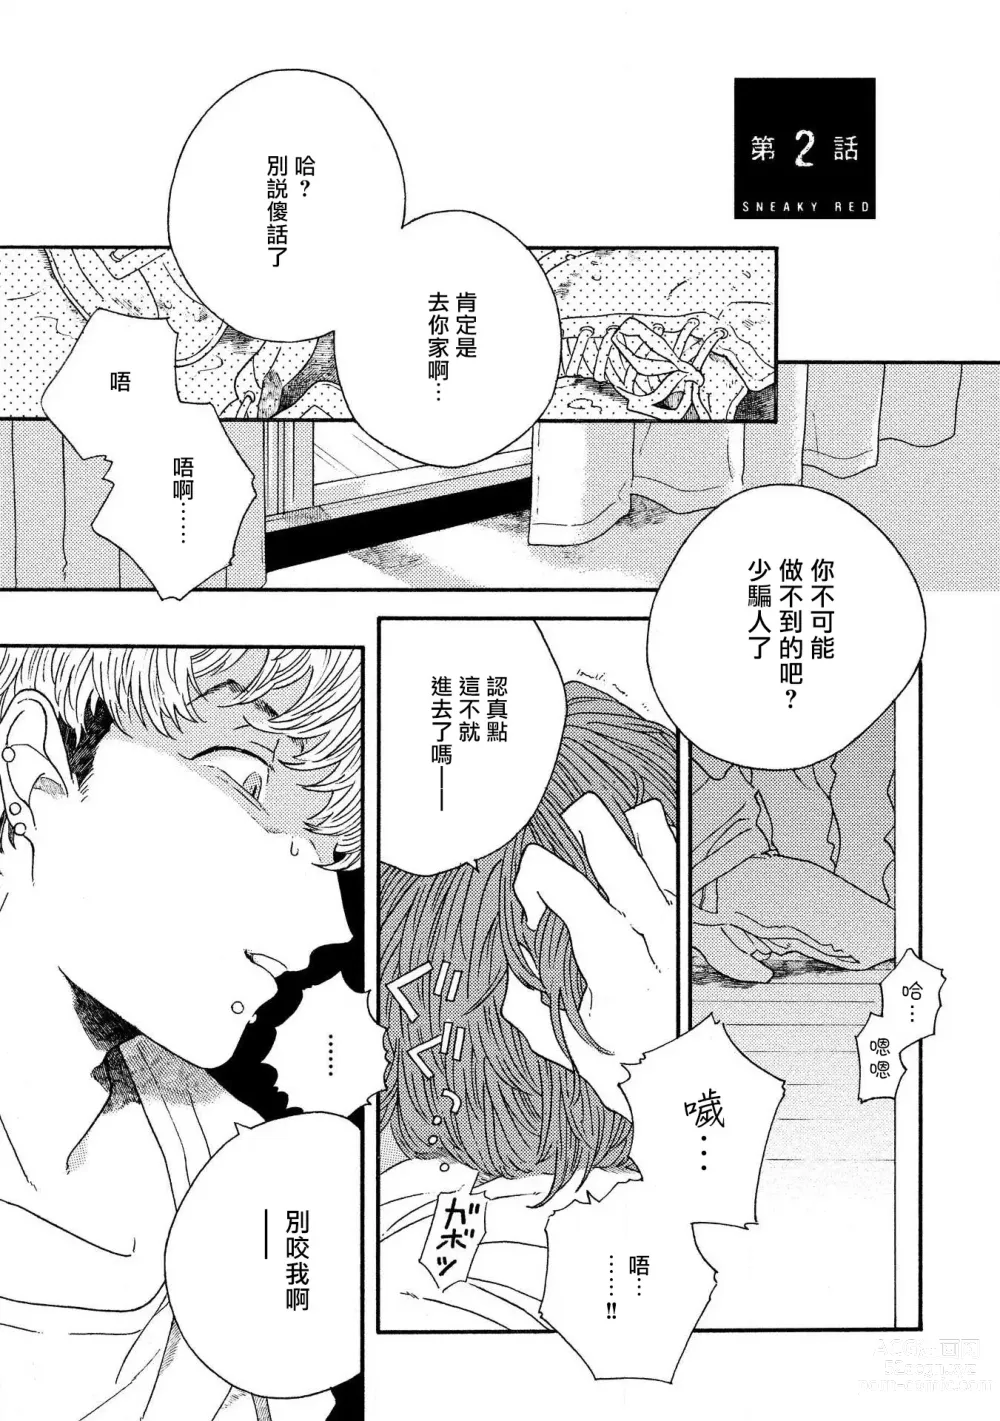 Page 24 of manga Sneaky Red Ch. 1-2